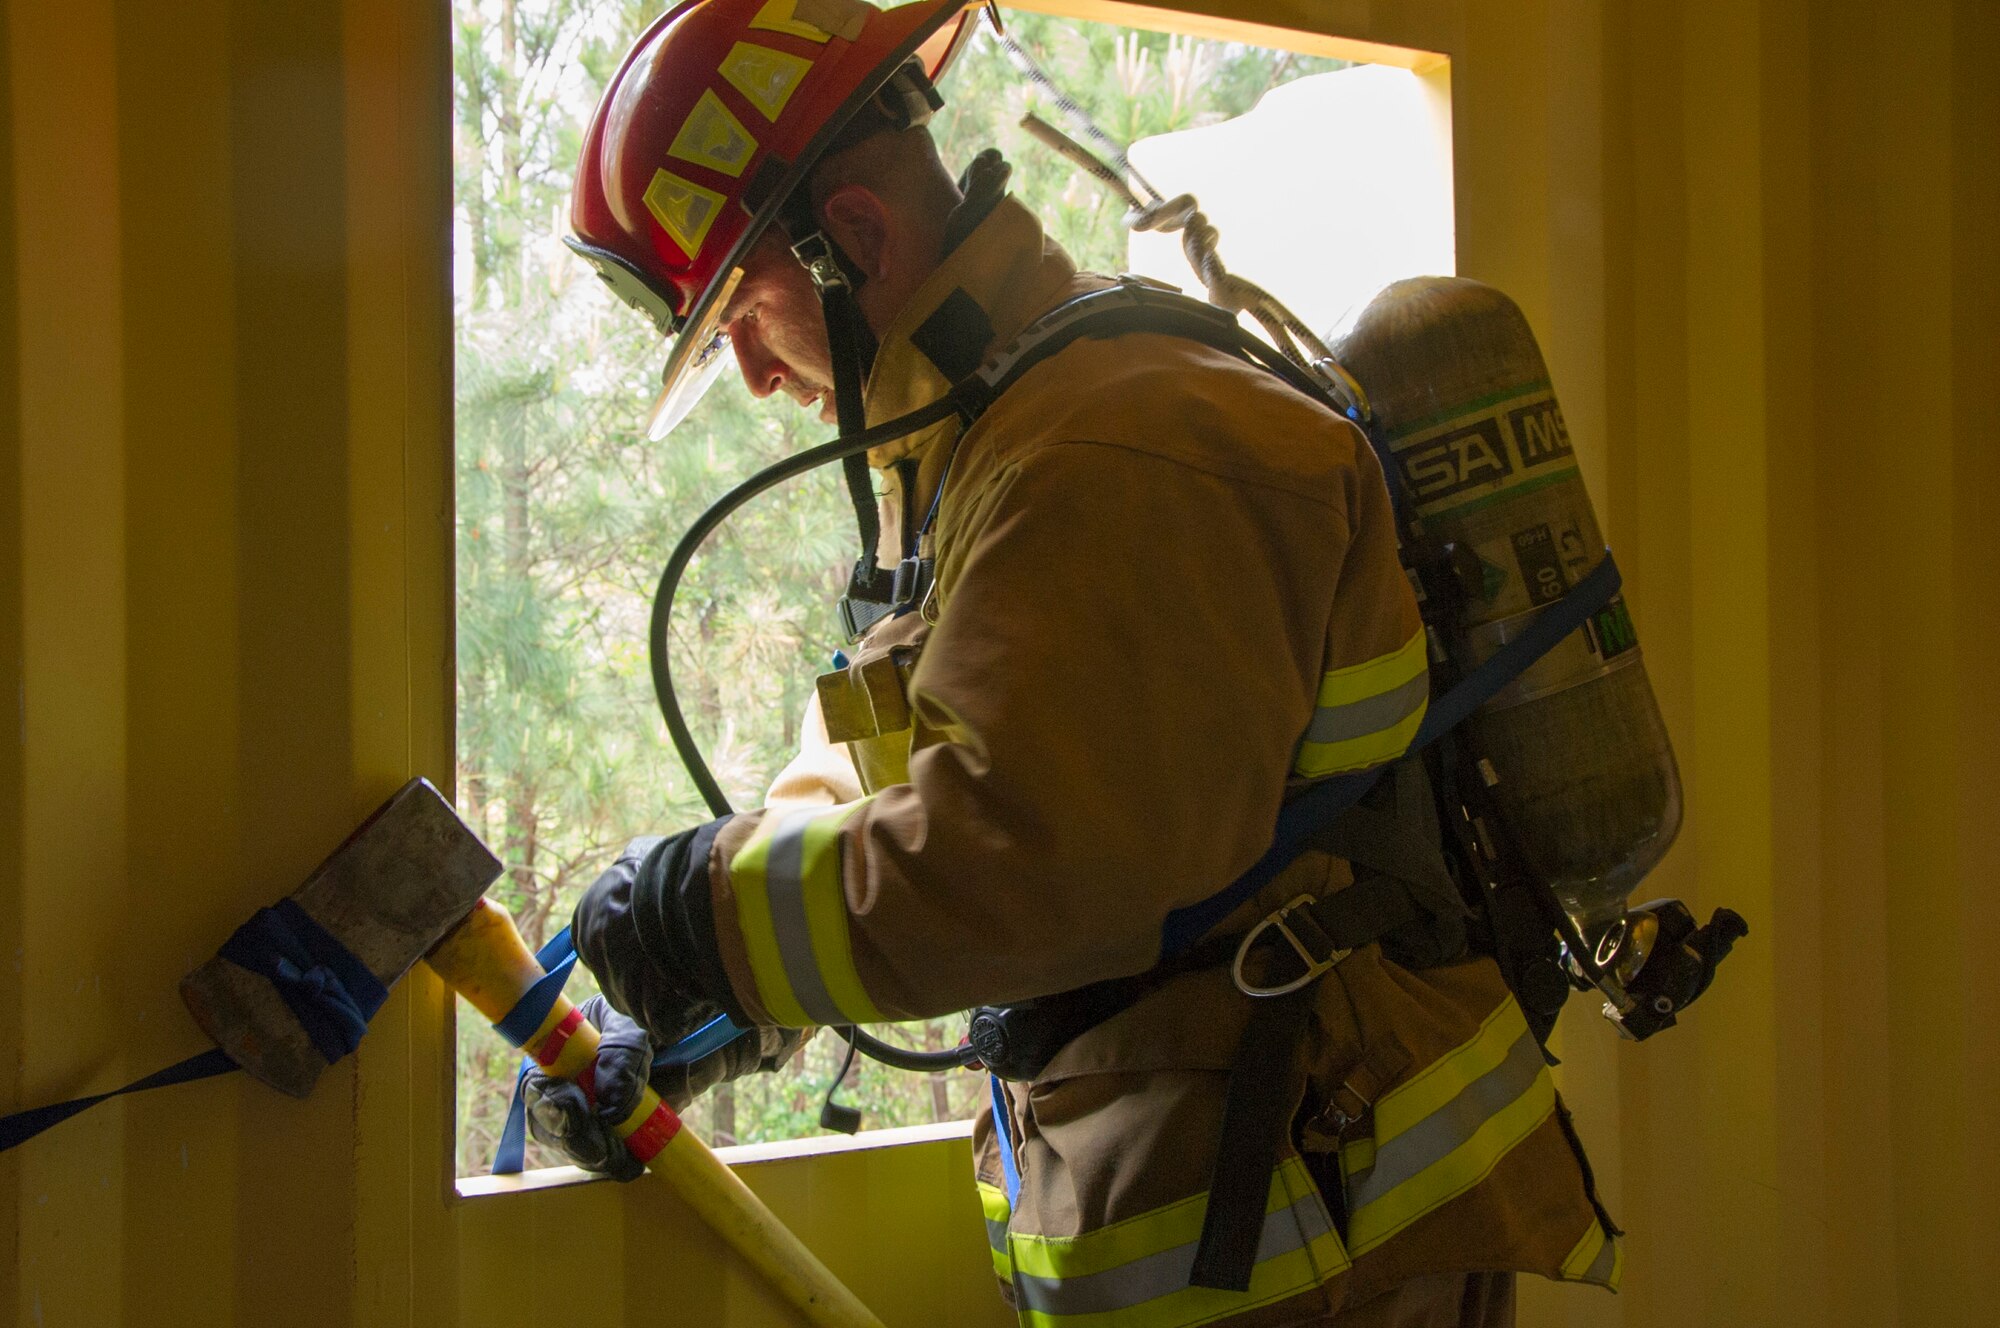 U.S. Air Force Tech. Sgt. Adam Murray from the 507th Civil Engineer Squadron, Tinker Air Force Base, Okla., uses an axe to practice a bailout technique from a simulated burning building during the first-ever Air Force Reserve Command Firefighter Rescue and Survival Course at Dobbins Air Reserve Base, Ga., April 18, 2017. Twenty Citizen Airmen participated in the intense 50-hour course held at the 622nd Civil Engineer Group expeditionary combat support-training certification center, which focused on a Rapid Intervention Crew, or RIC. The RIC is a dedicated and specially trained group of firefighters whose responsibilities include safely evacuating a distressed firefighter from a structure. (U.S. Air Force photo by Master Sgt. Theanne K. Herrmann)